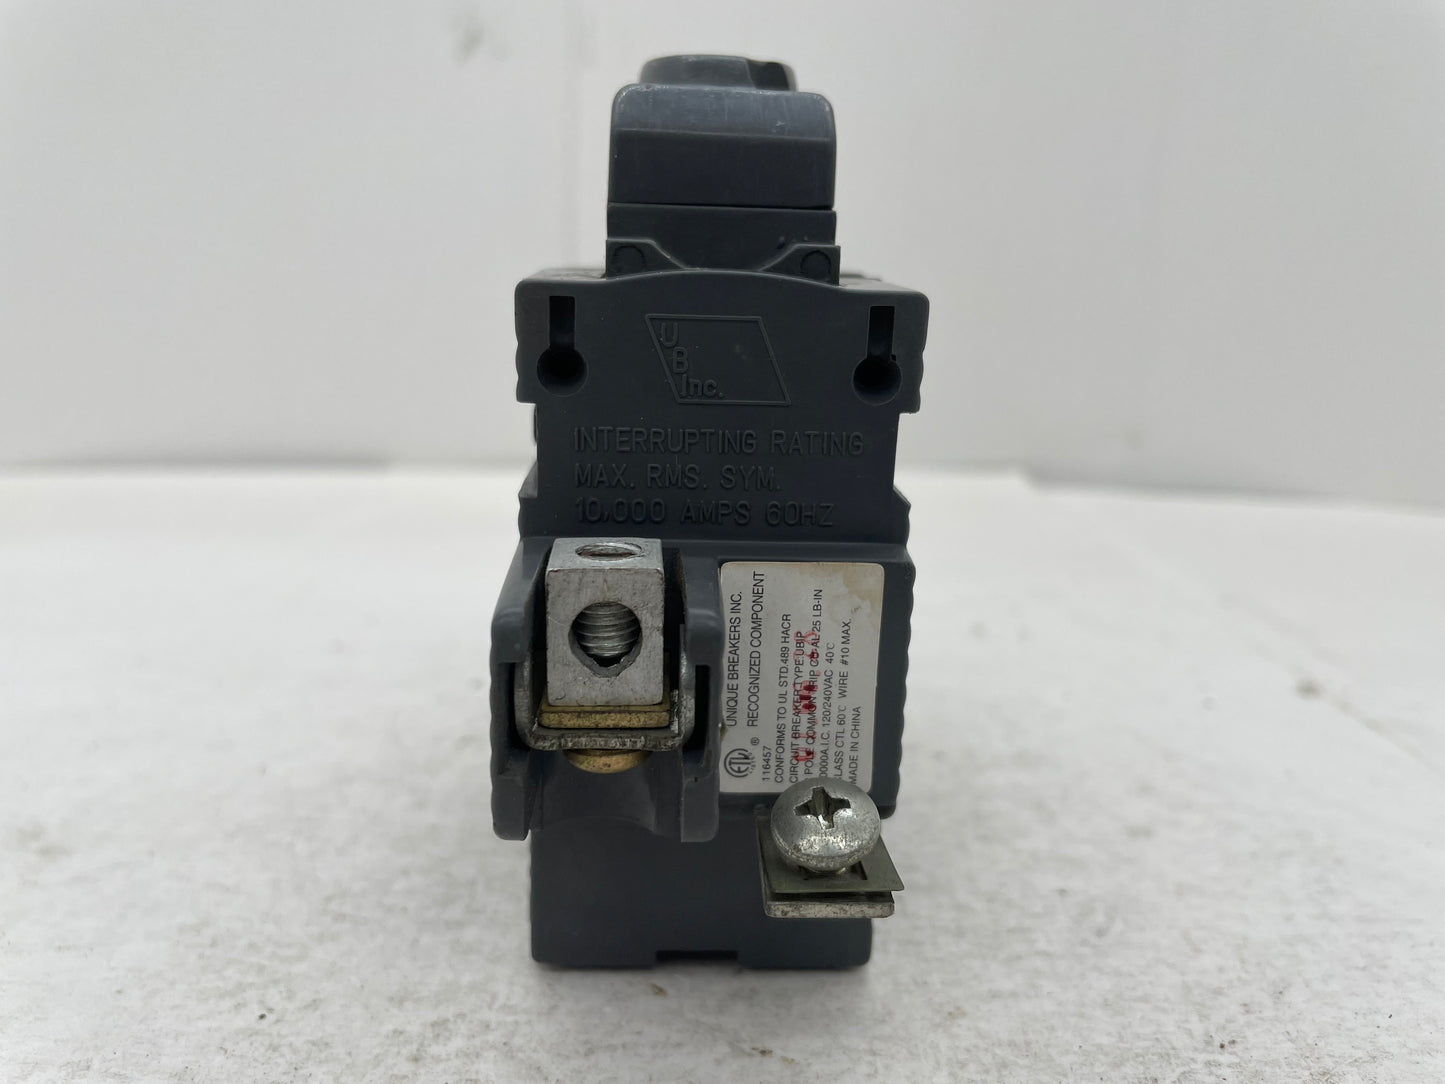 Connecticut Electric UBIP230 2P 30A Pushmatic Replacement Circuit Breaker - Used